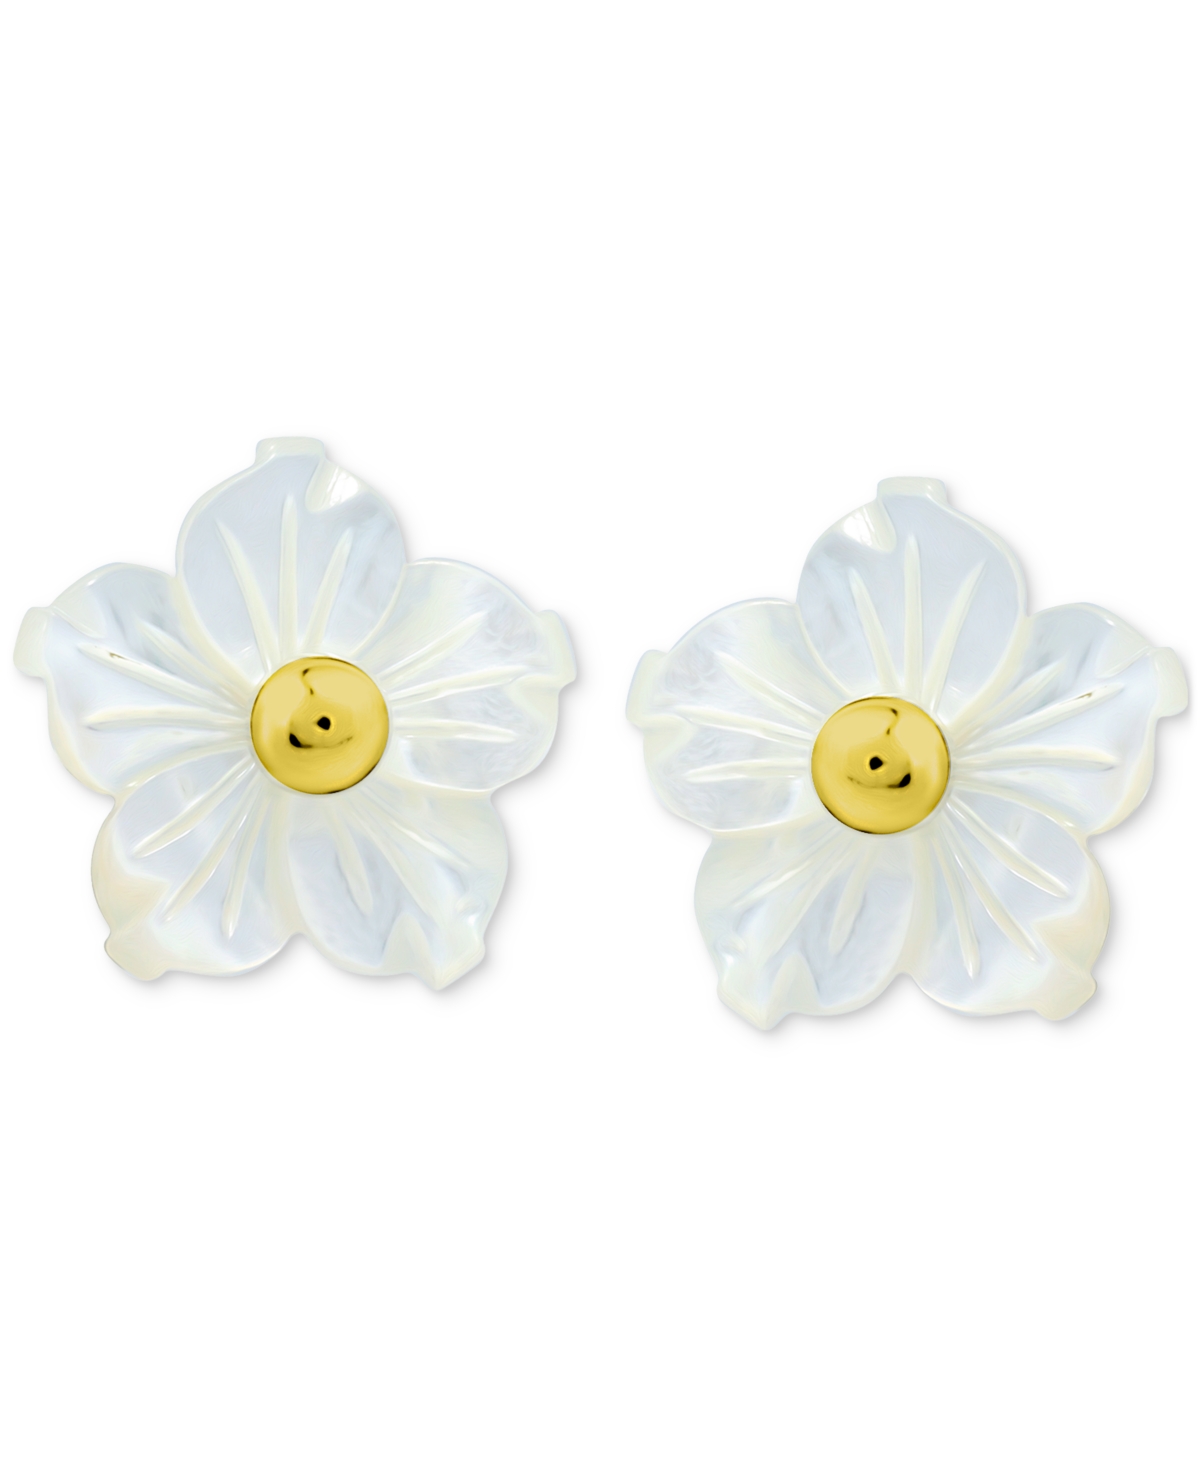 Giani Bernini Mother Of Pearl Flower Stud Earrings In 18k Gold-plated Sterling Silver, Created For Macy's In Pink,silver